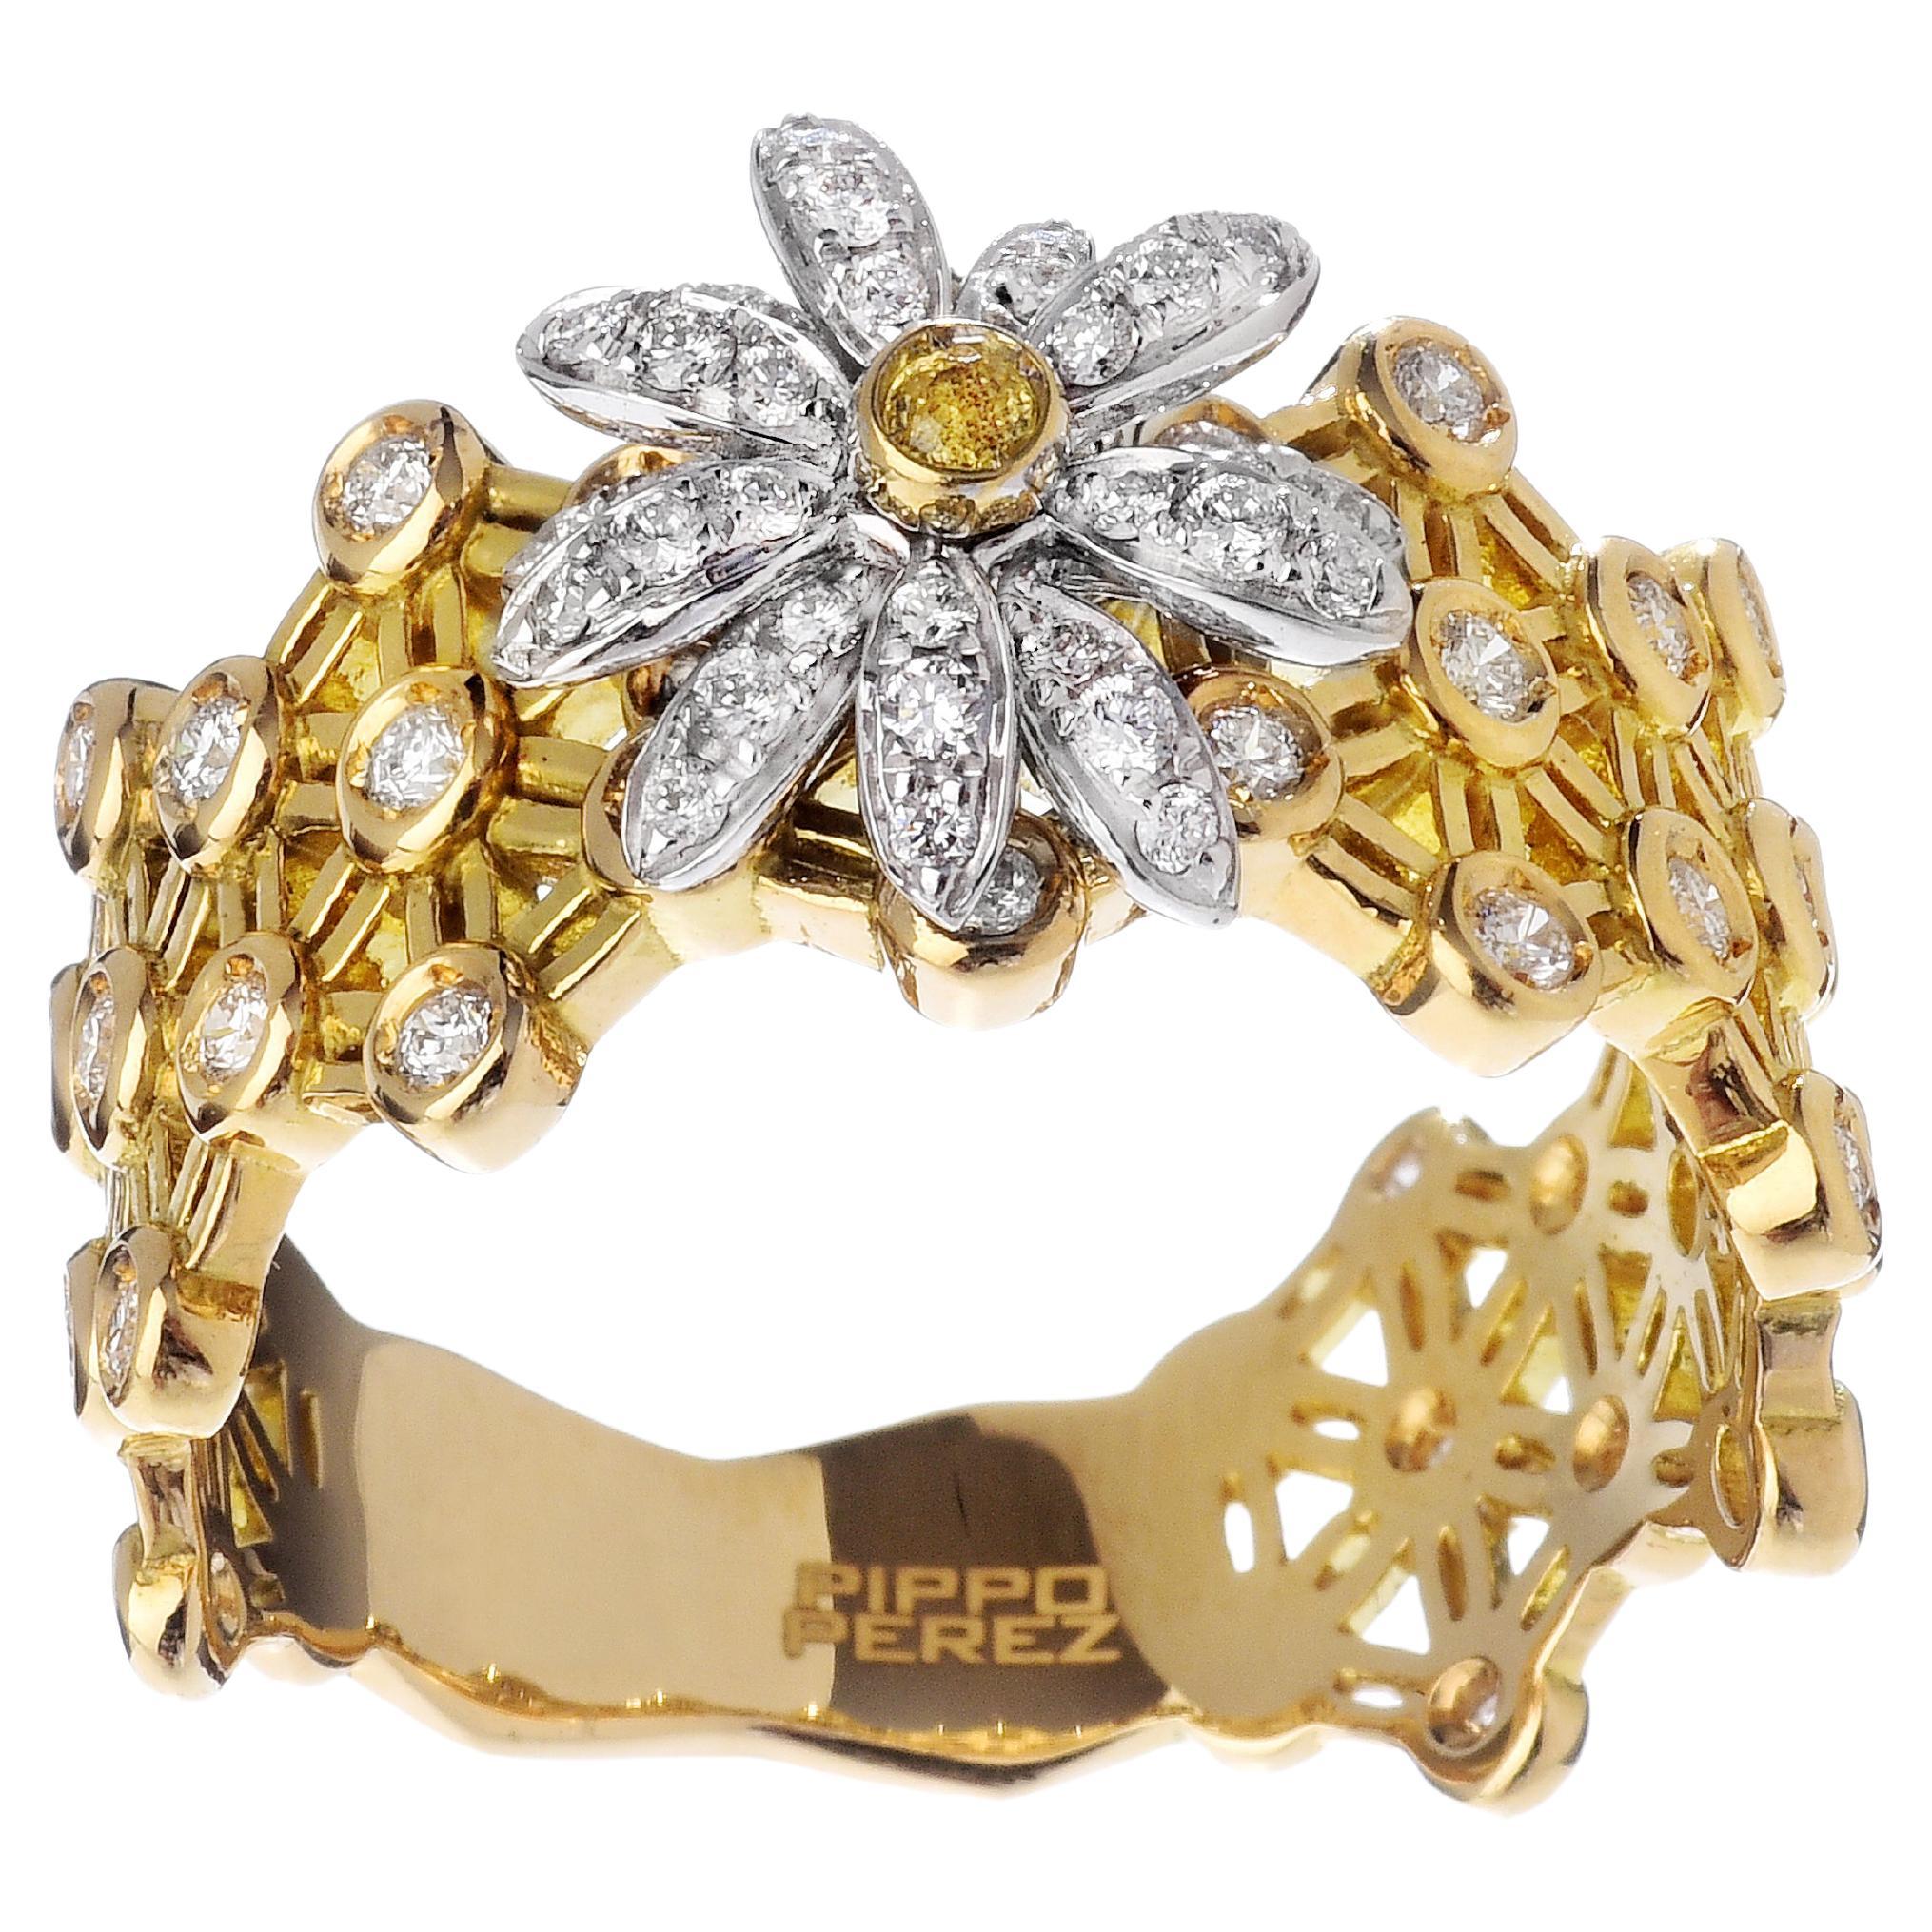 Pippo Perez Daisy Flower Ring White Diamond, Yellow Gold Ring For Sale